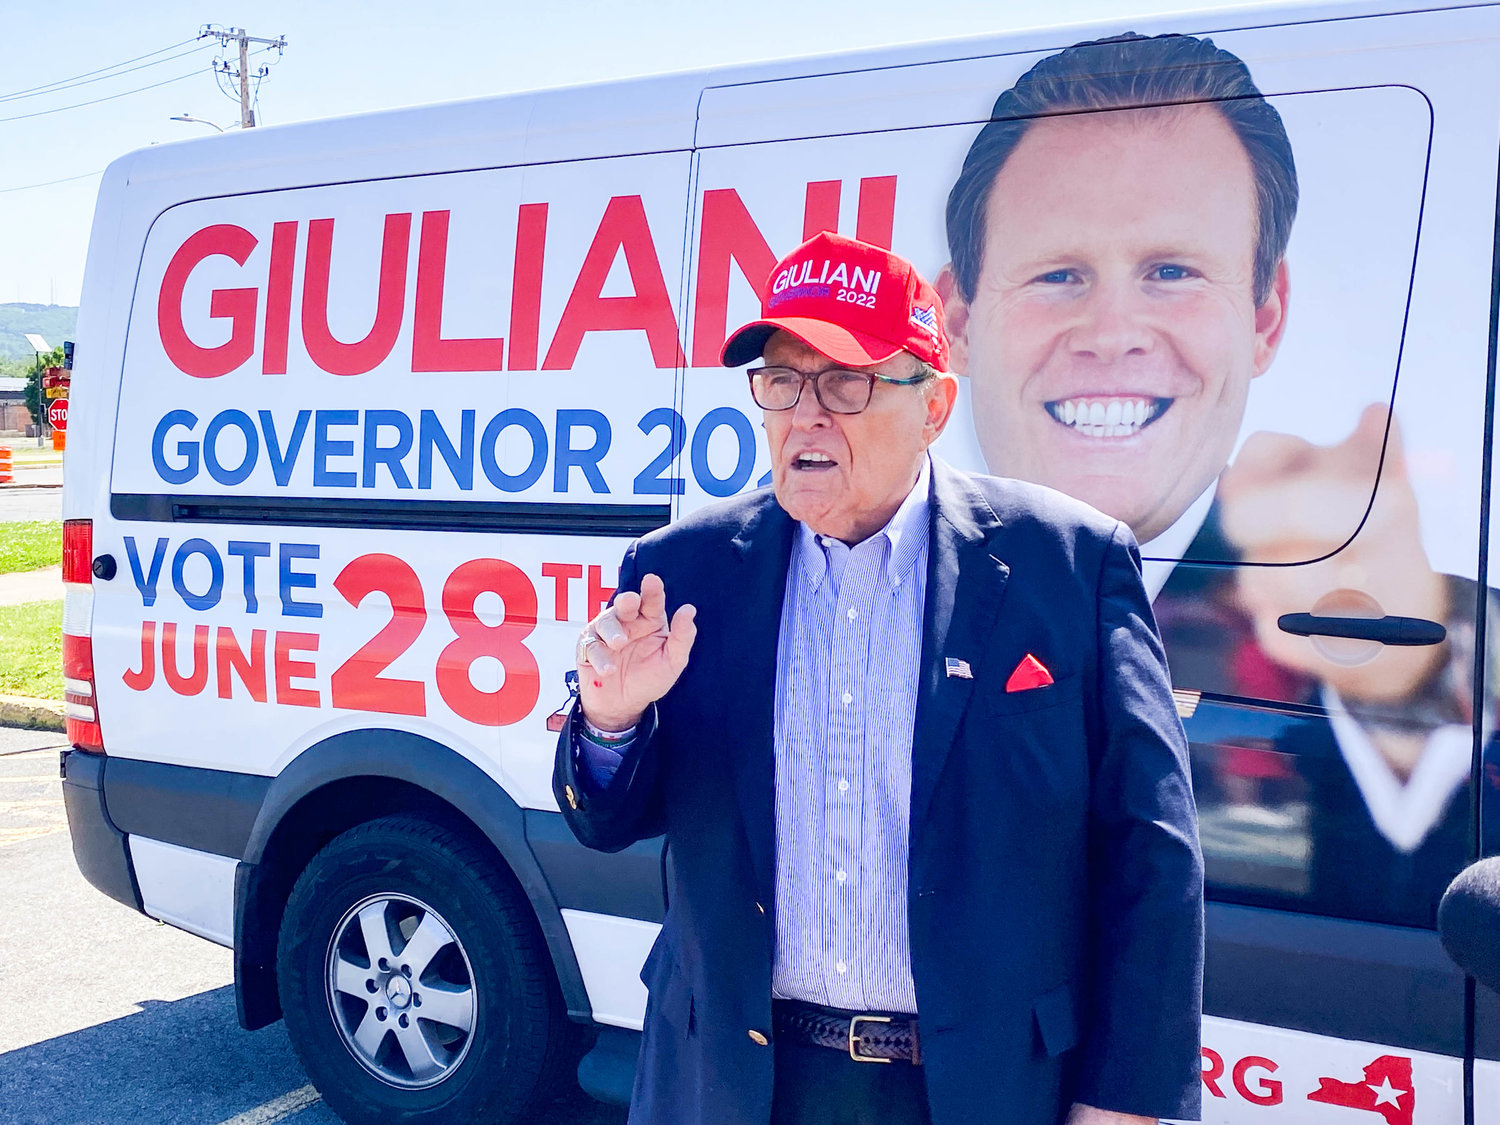 Rudy Giuliani speaks to a gathering at the parking lot of the Adirondack Bank Center on Monday during a brief stop in Utica for his son, Andrew Giuliani, in the latter’s campaign for governor of New York.